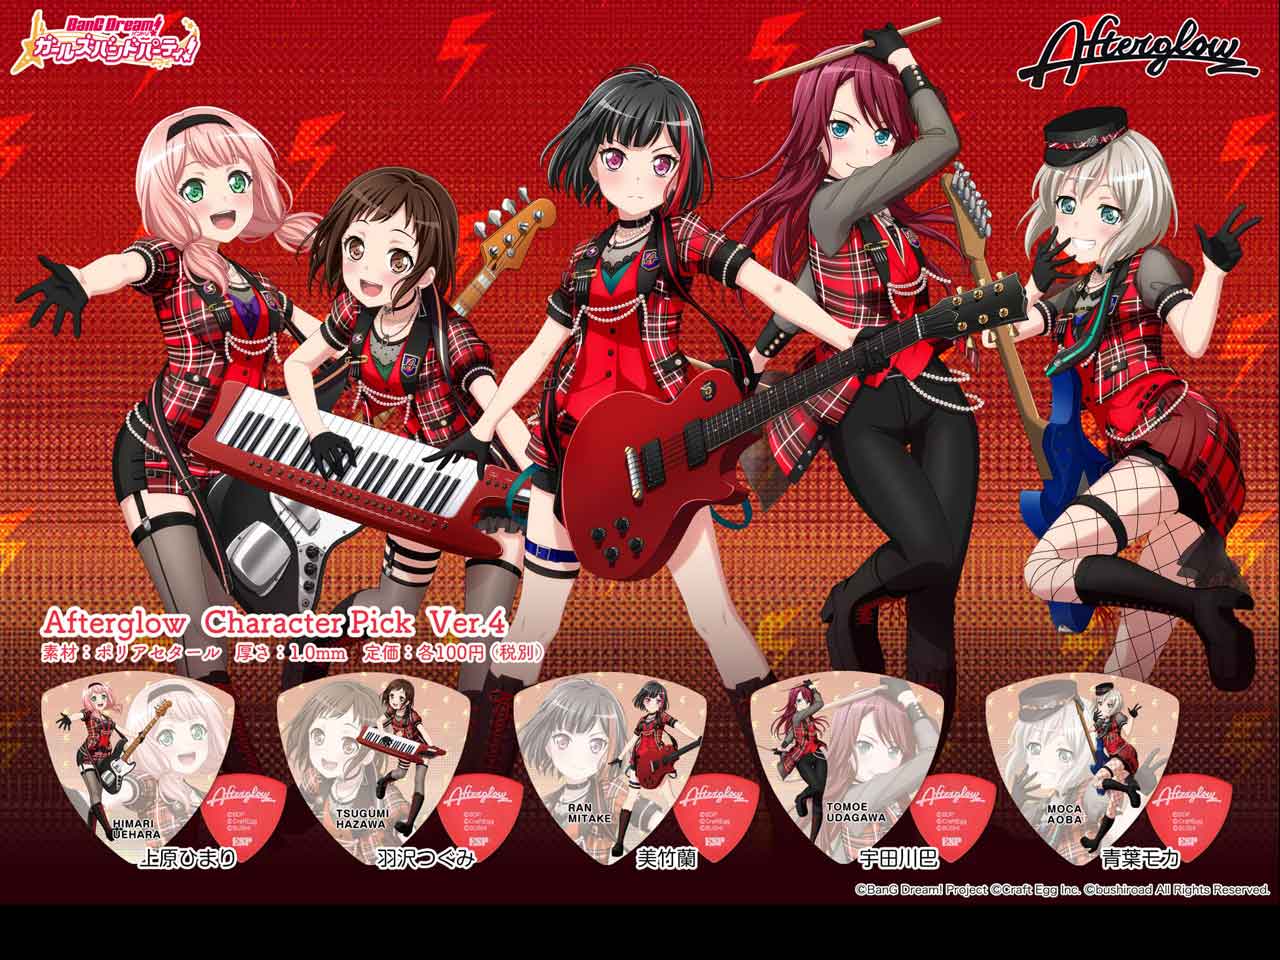 【ESP×BanG Dream!コラボピック】Afterglow Character Pick Ver.4 "美竹蘭"（GBP RAN AFTERGLOW 4）＆”ハメパチ” セット